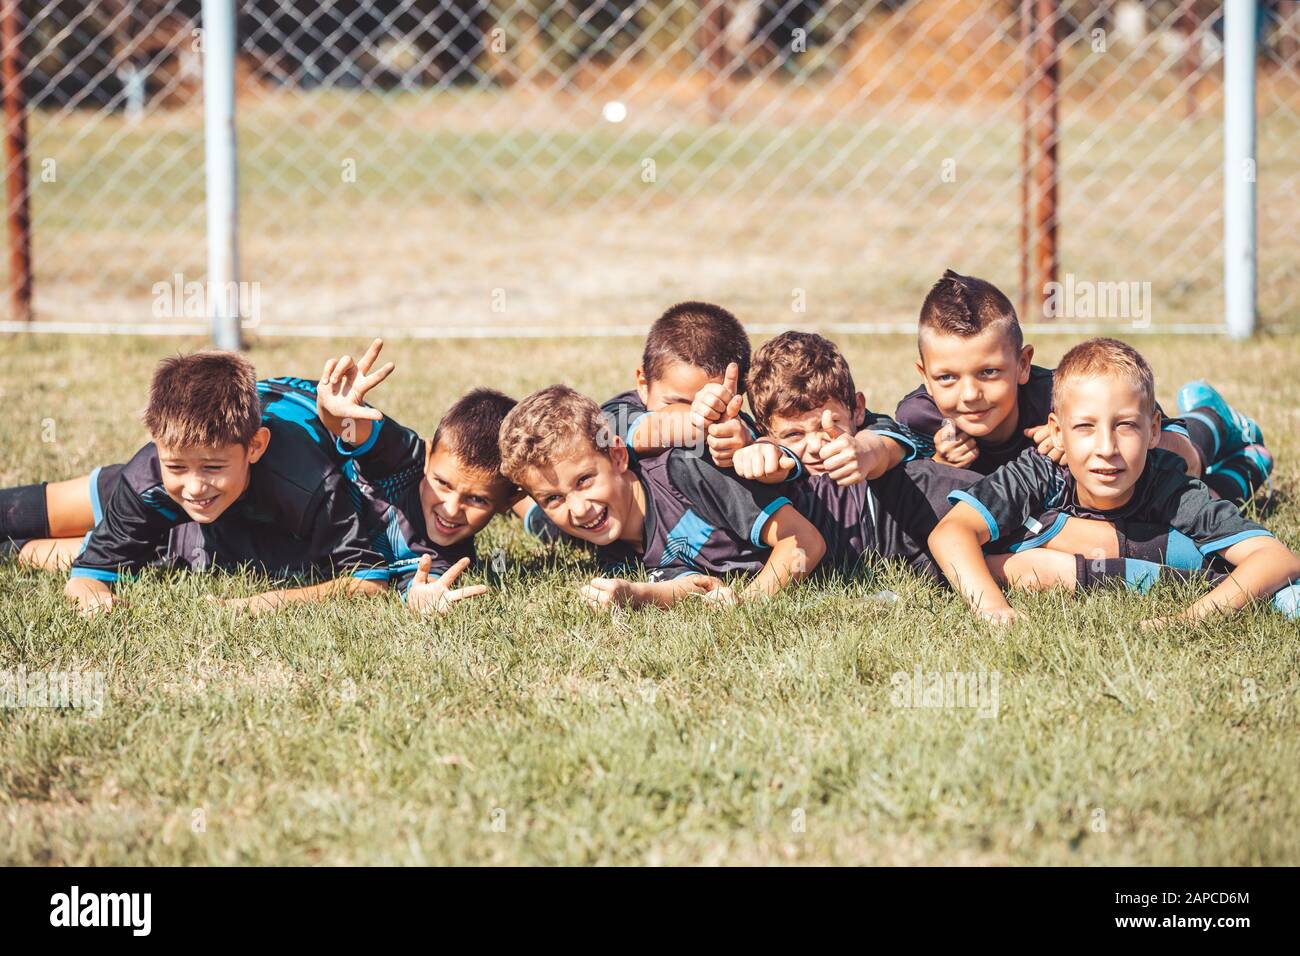 Kids soccer football - young children players celebrating with their hands up, after victory. Stock Photo